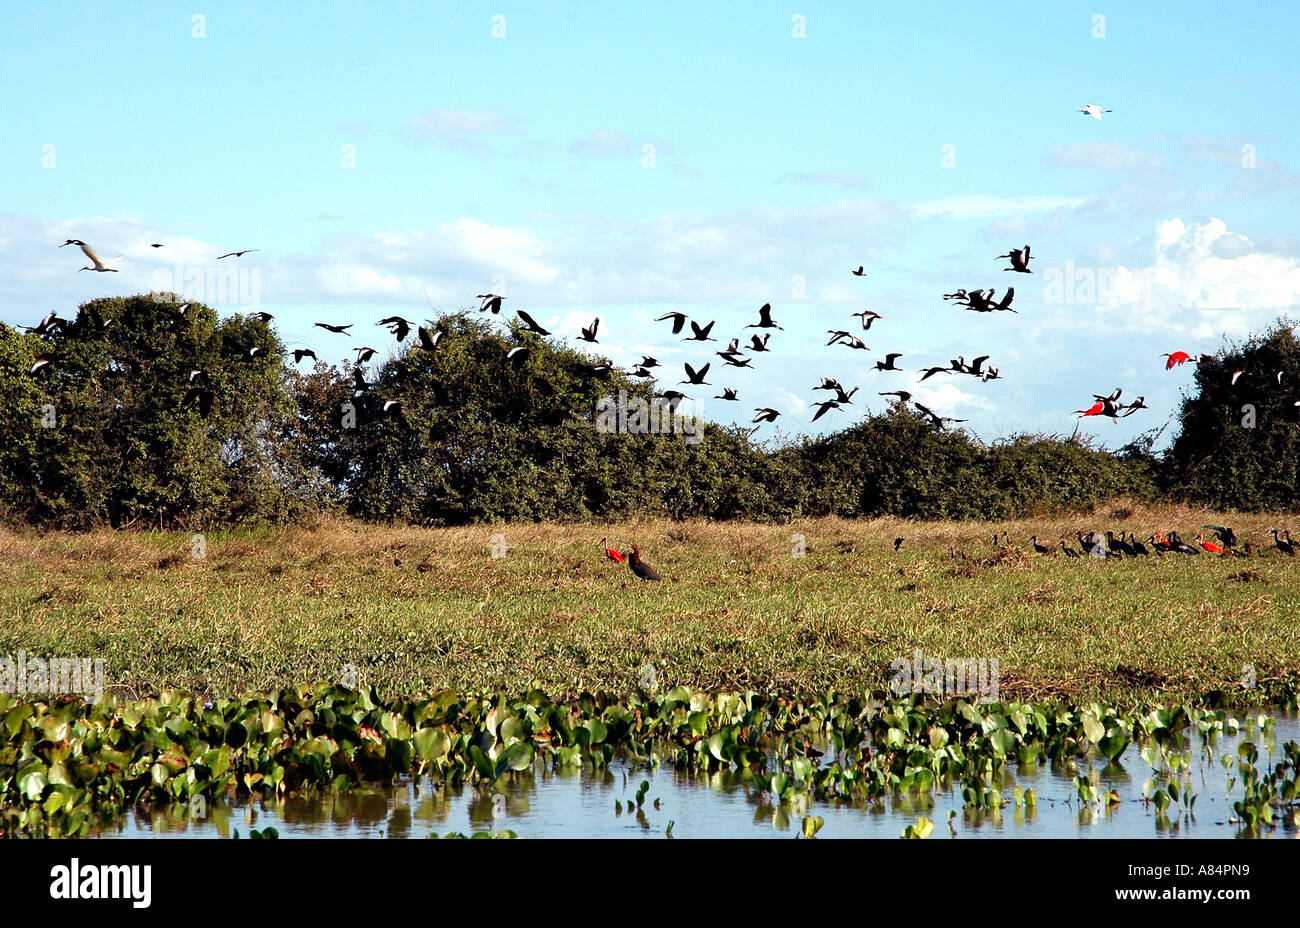 In Venezuela's Llanos landscape birdlife is extensive ranging from tiny hummingbirds to herons to the biggest waders Stock Photo